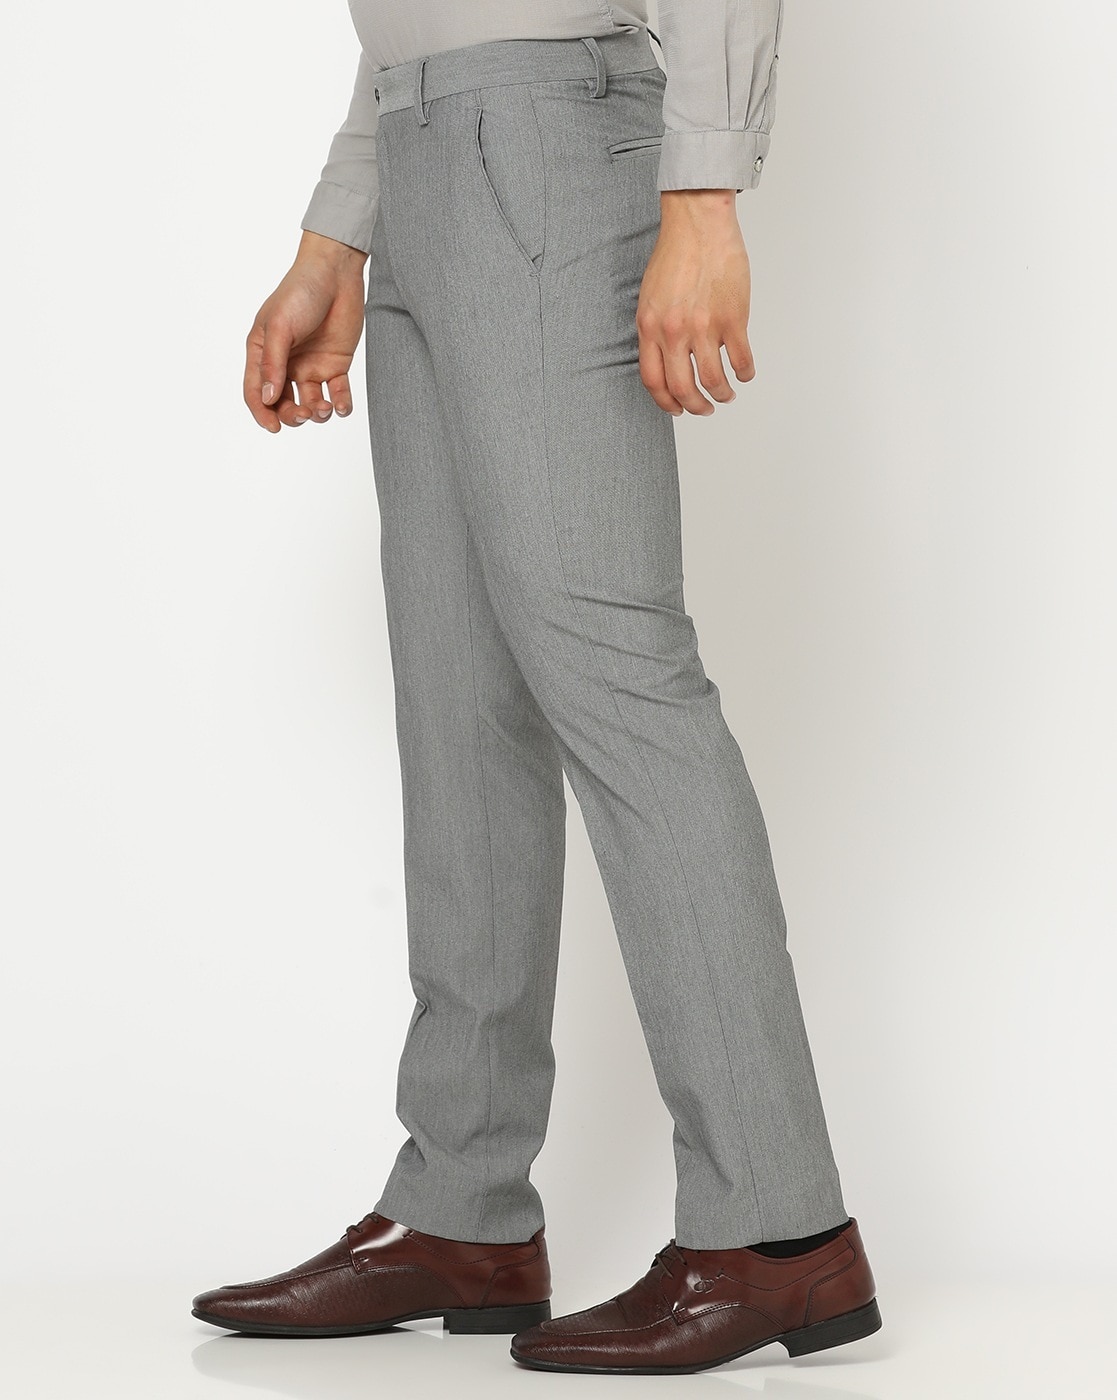 Textured Trousers - Buy Textured Trousers online in India